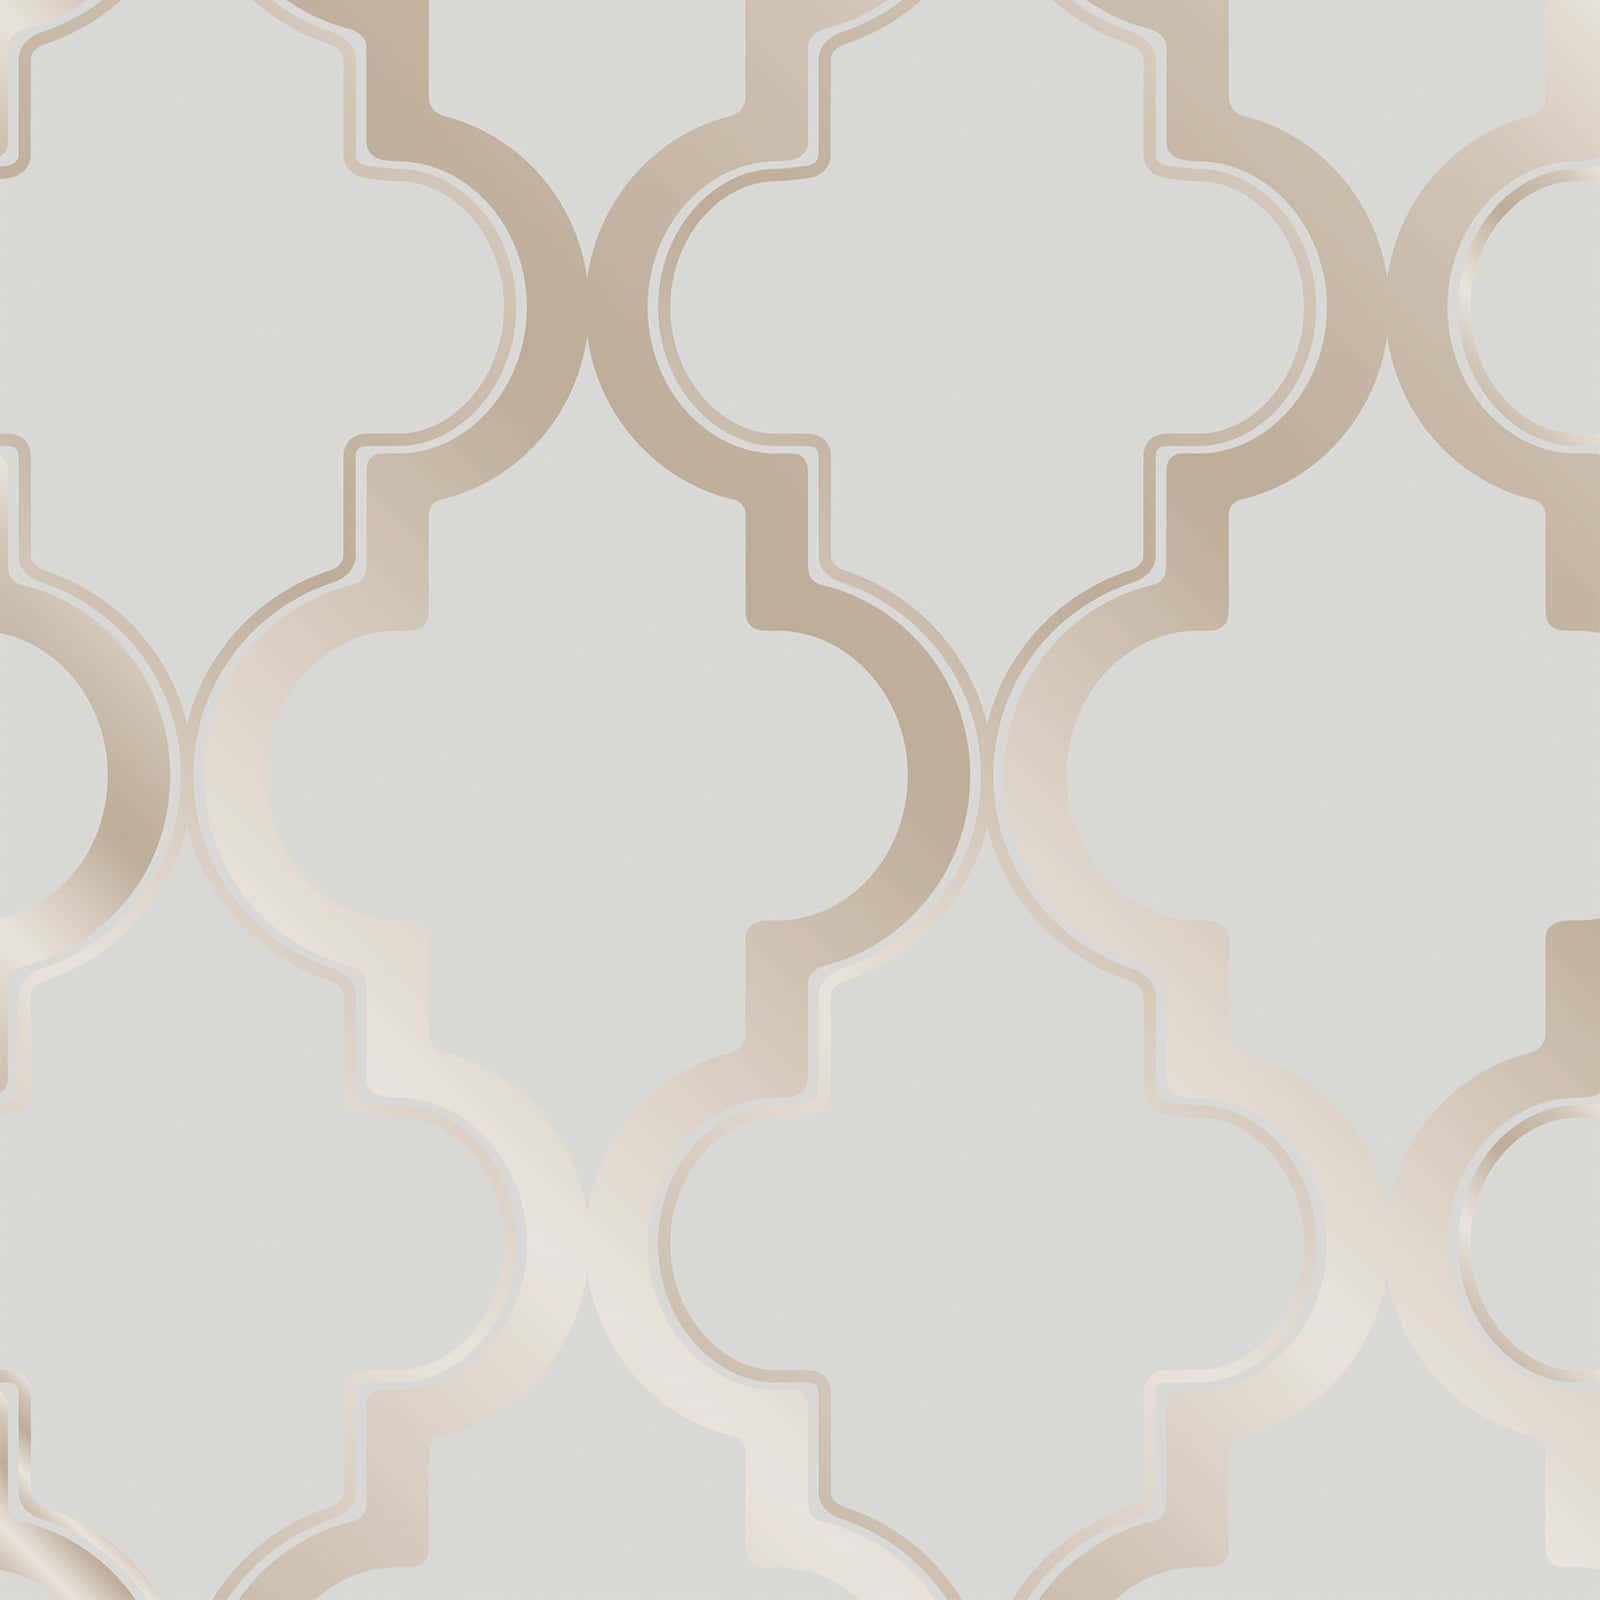 A new beautiful bronze wallpaper perfect for any office or home. Wallpaper